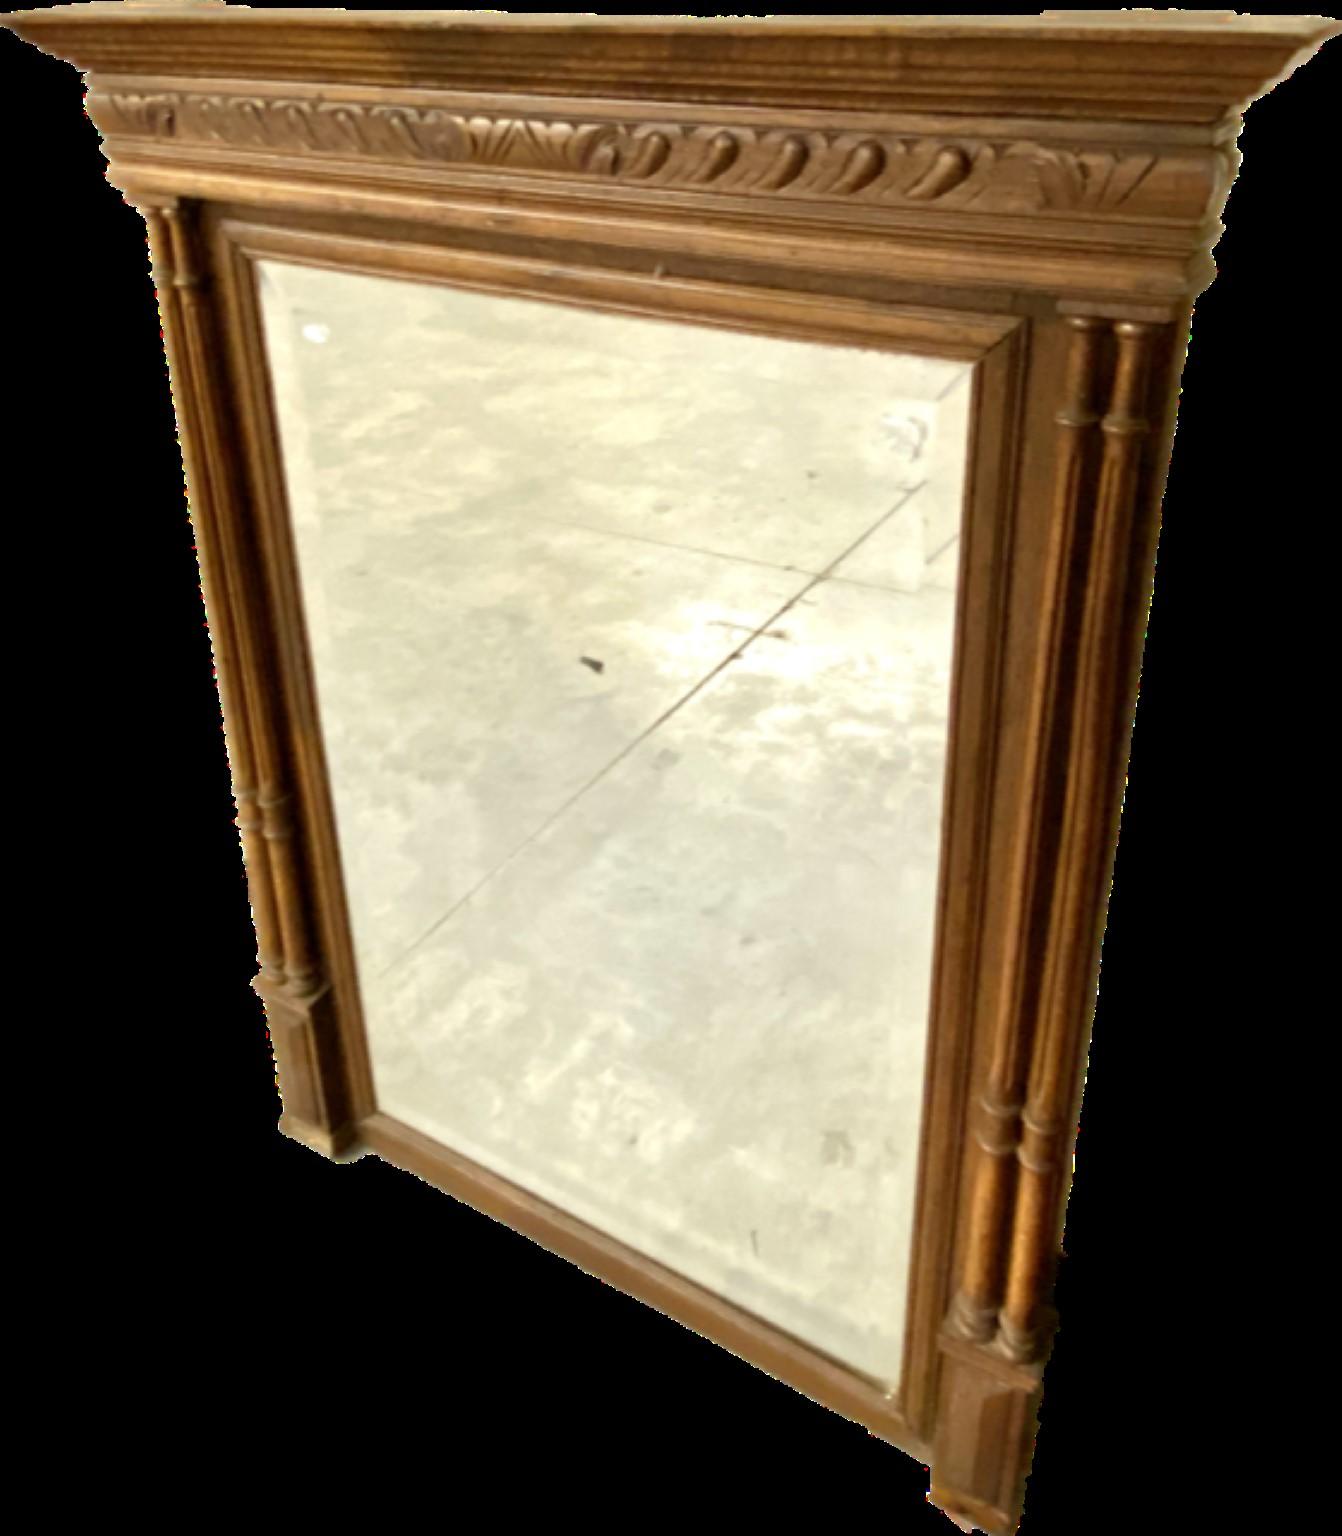 This mirror is a stately, French, carved oak, rectangular overmantel, with a heavy influence of symmetry in the Henry II renaissance style.